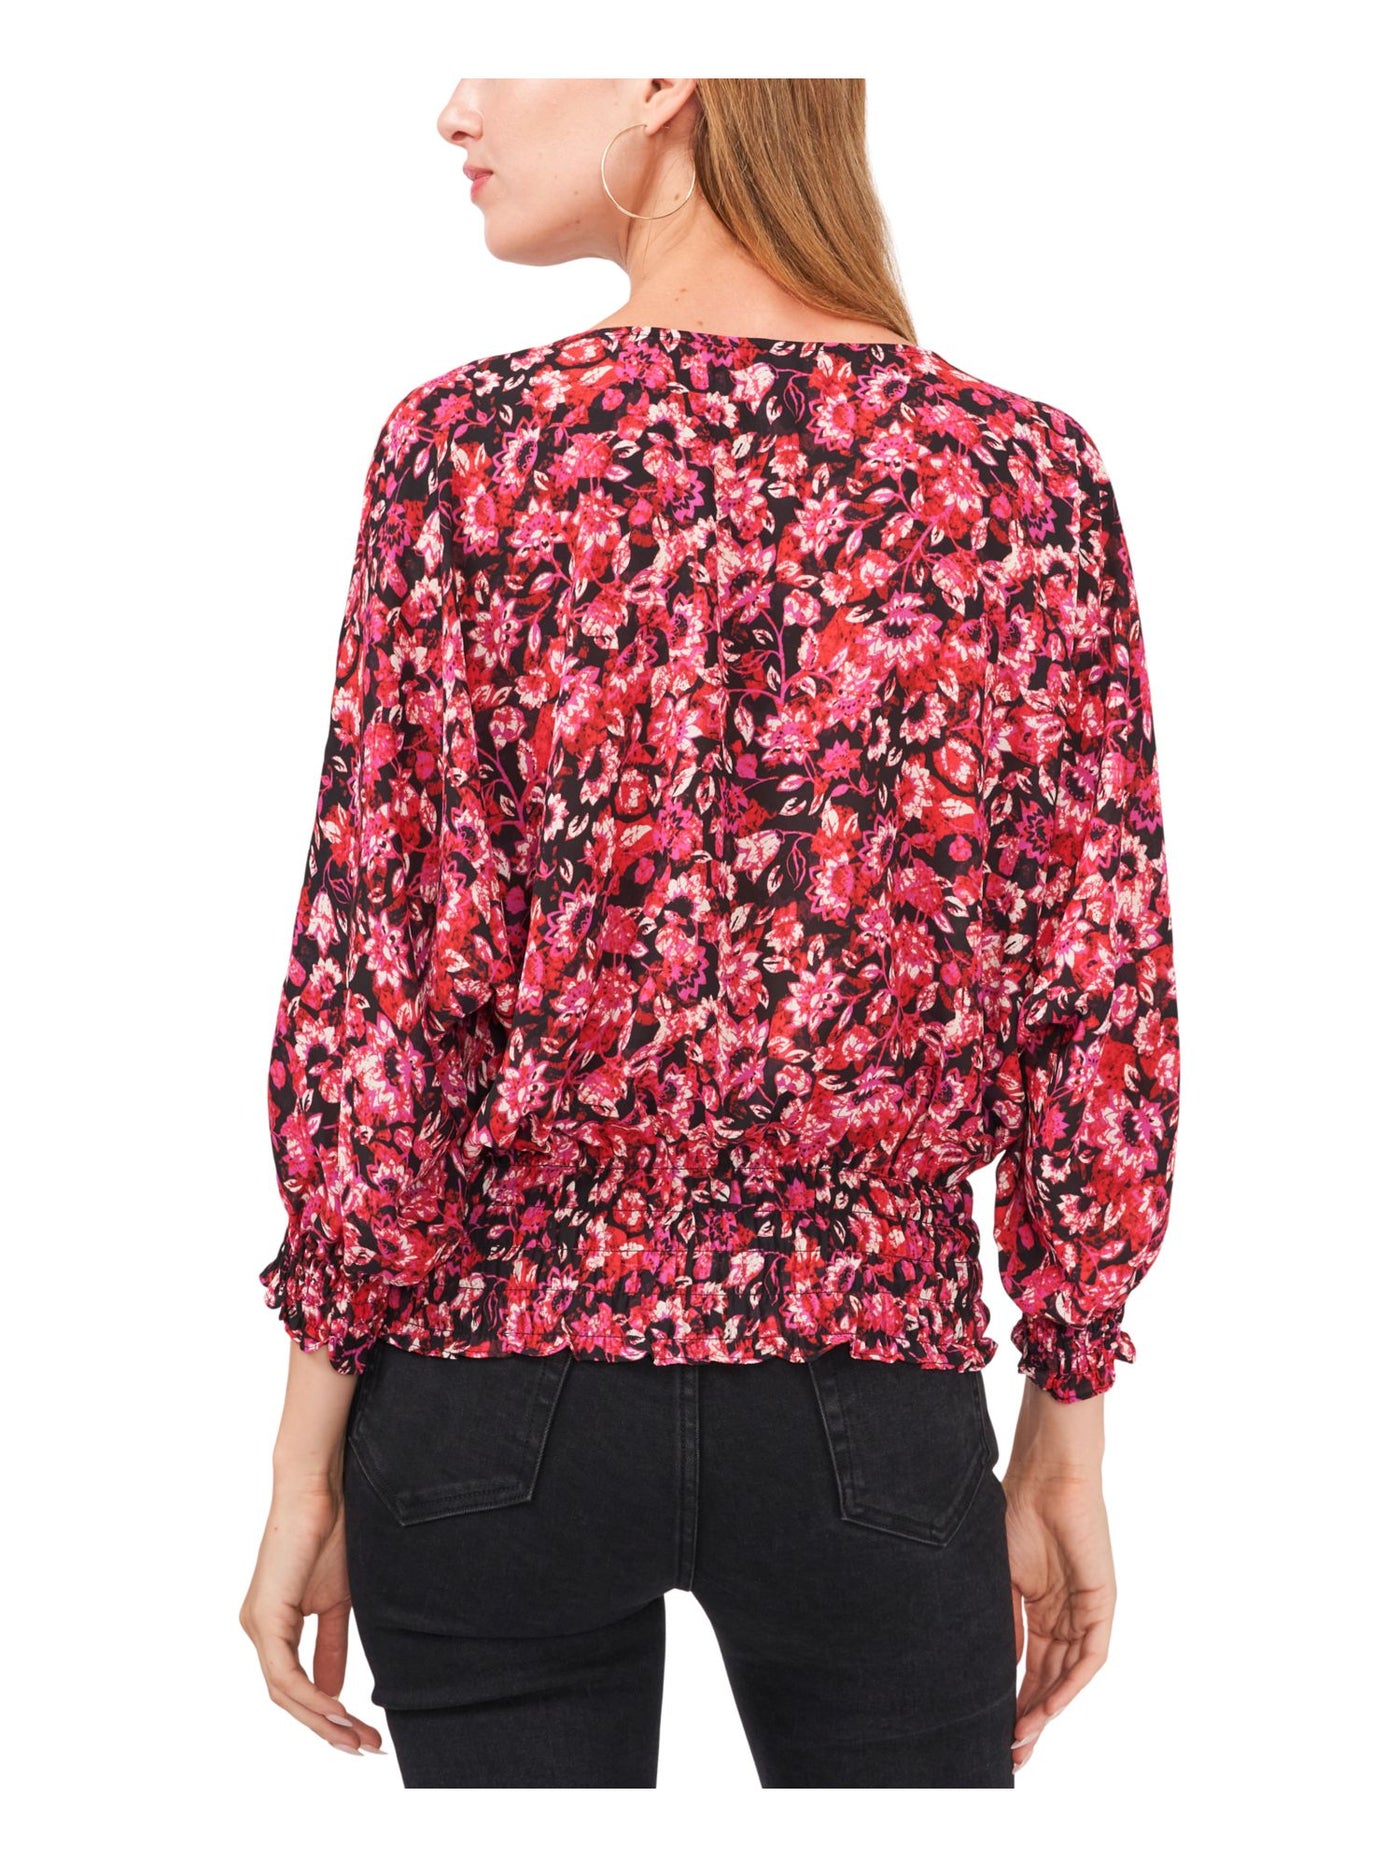 VINCE CAMUTO Womens Black Smocked Floral Blouson Sleeve Scoop Neck Wear To Work Blouse XS